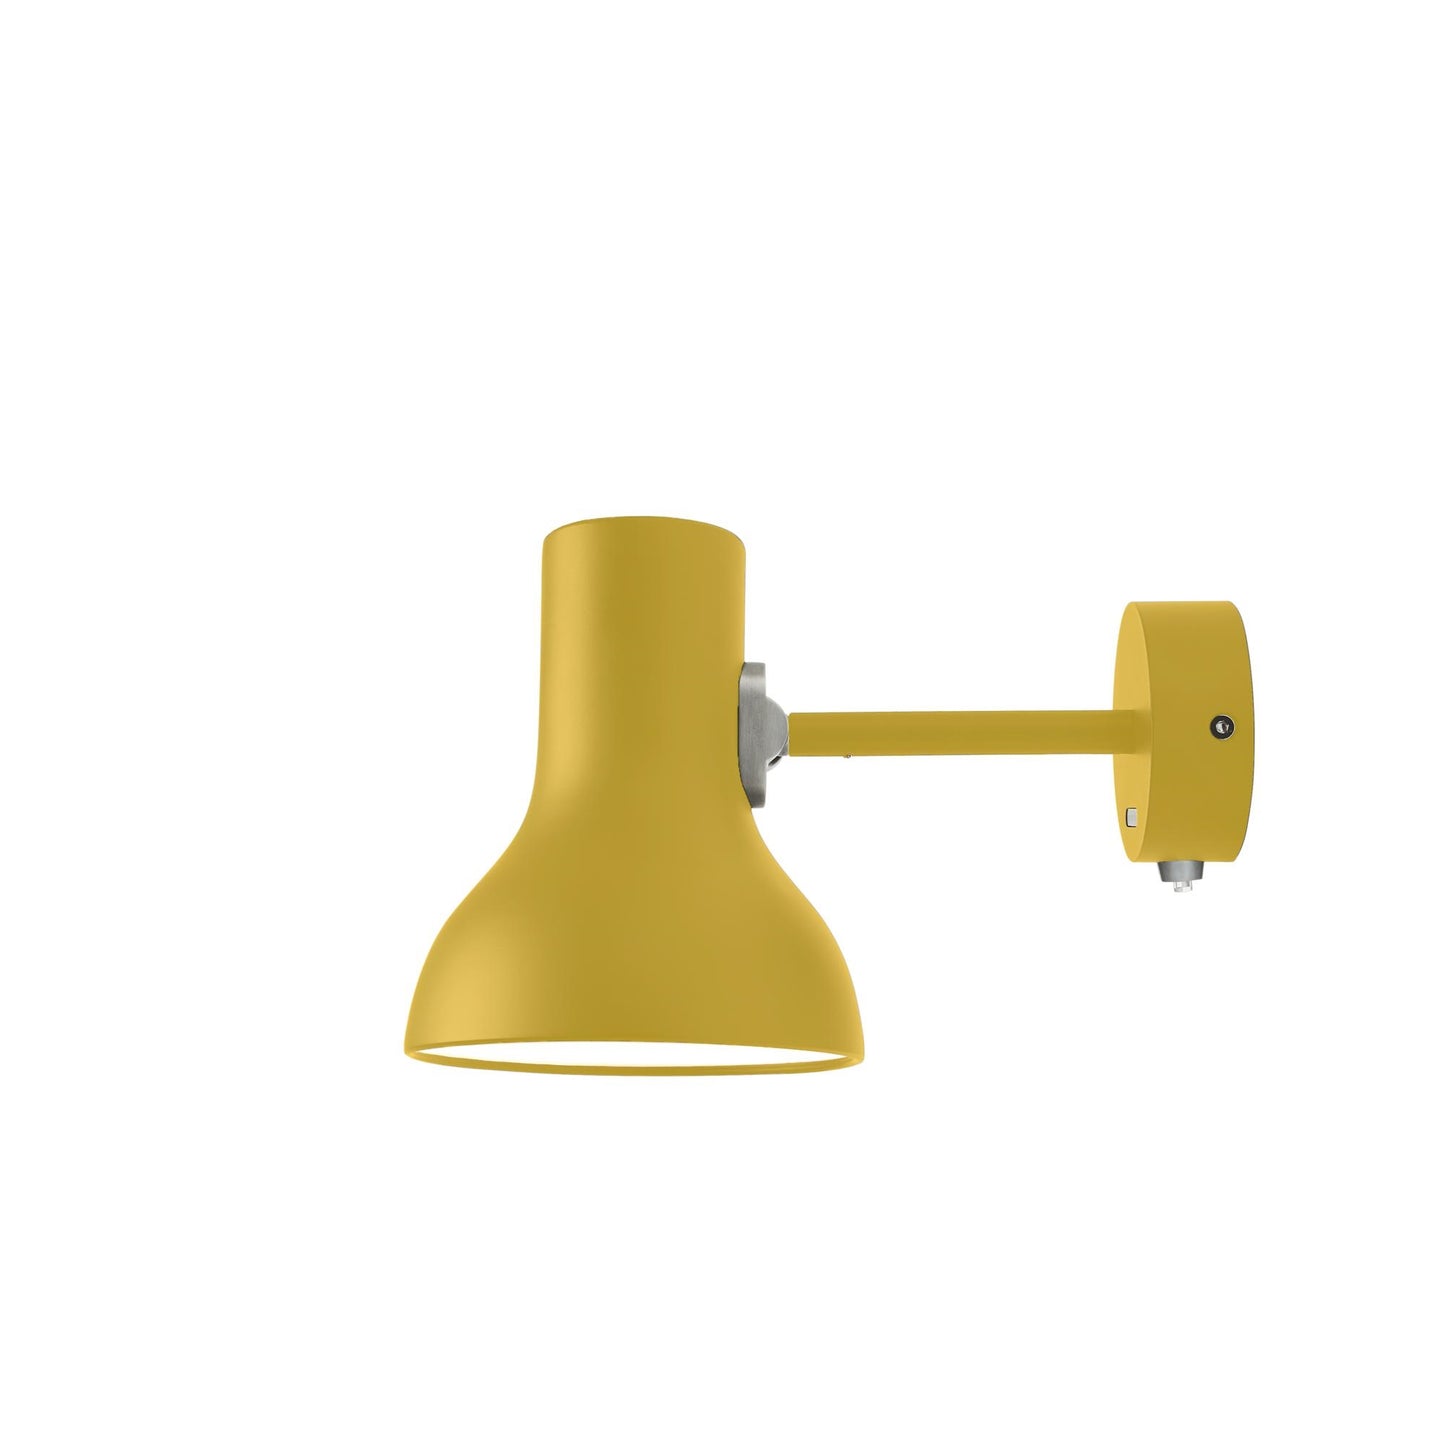 Type 75 Mini Wall Lamp (Margaret Howell Edition) by Anglepoise #Yellow Ochre